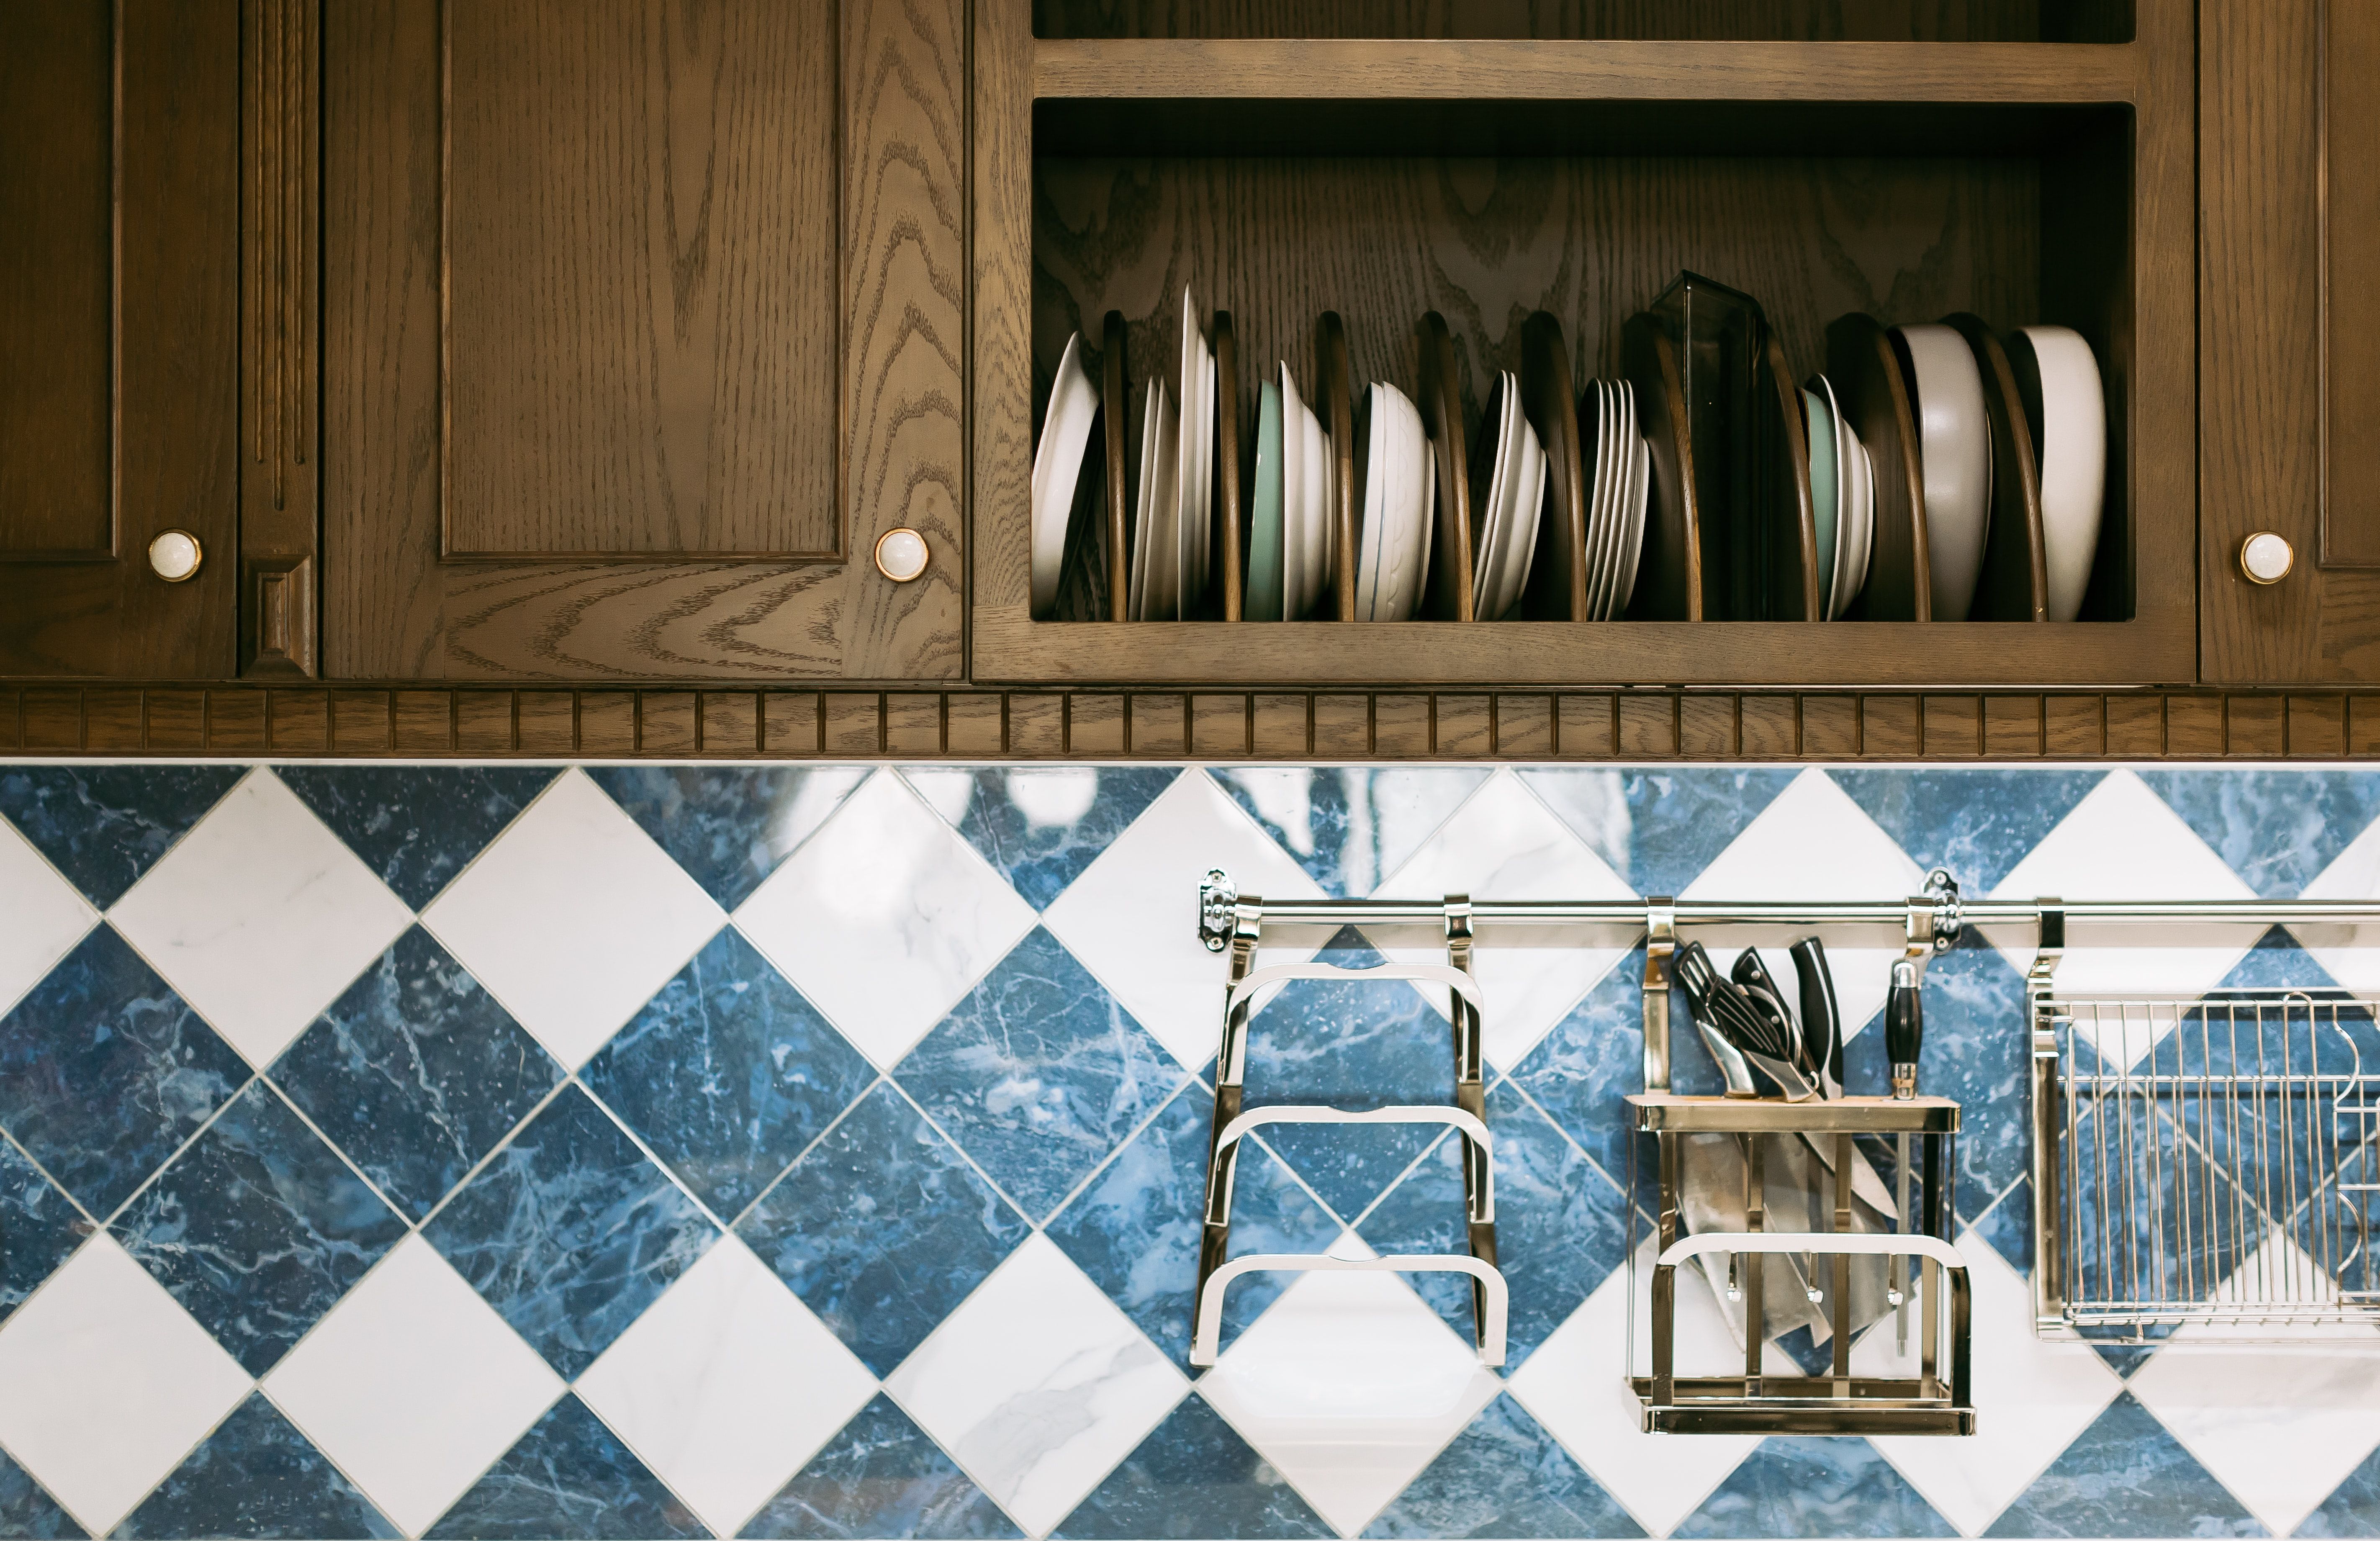 Brown kitchen cupboards above diagonally patterned tiles and metal hanging racks